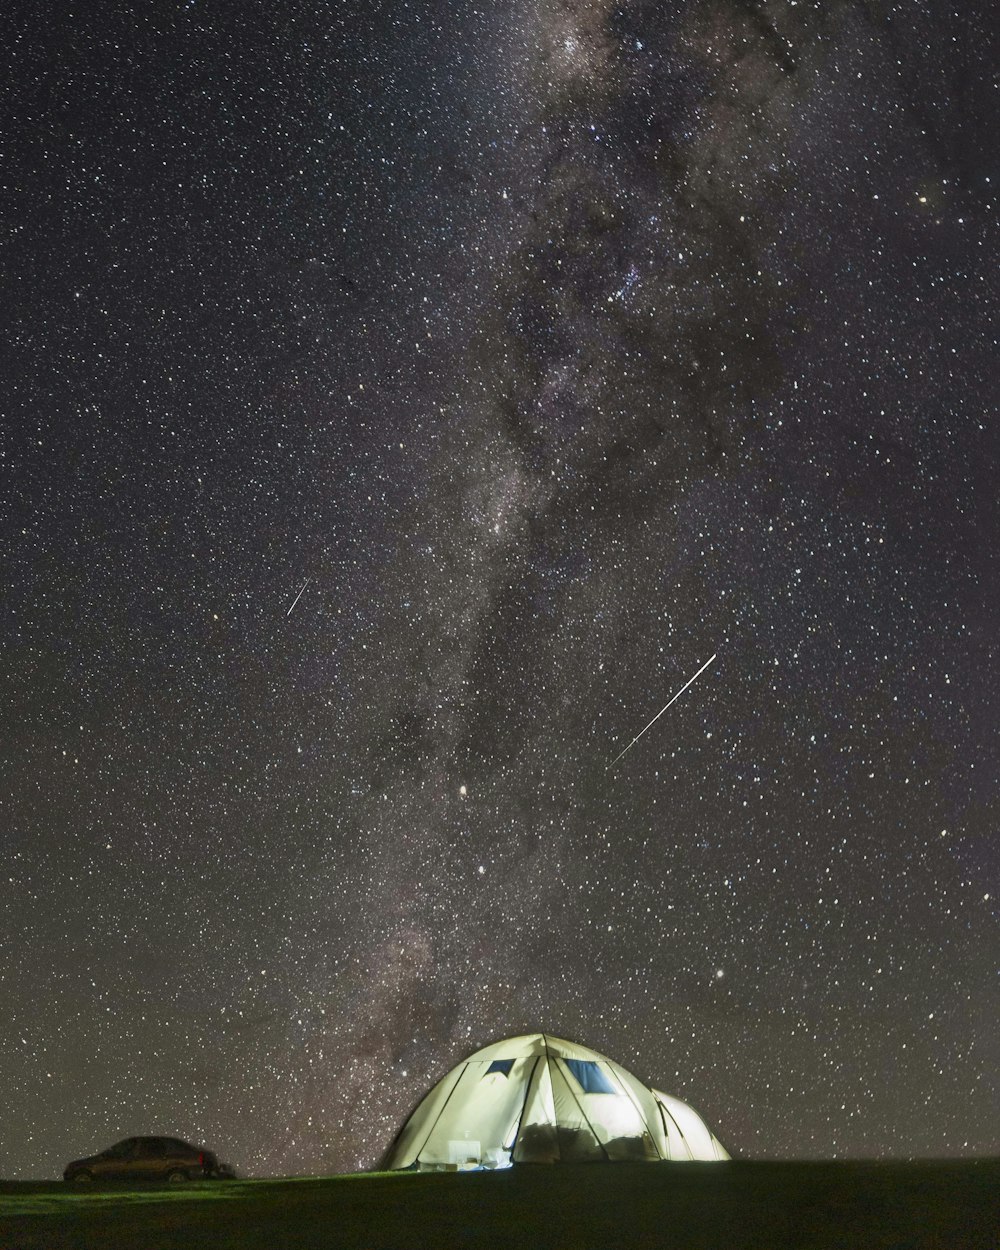 white dome tent under starry night